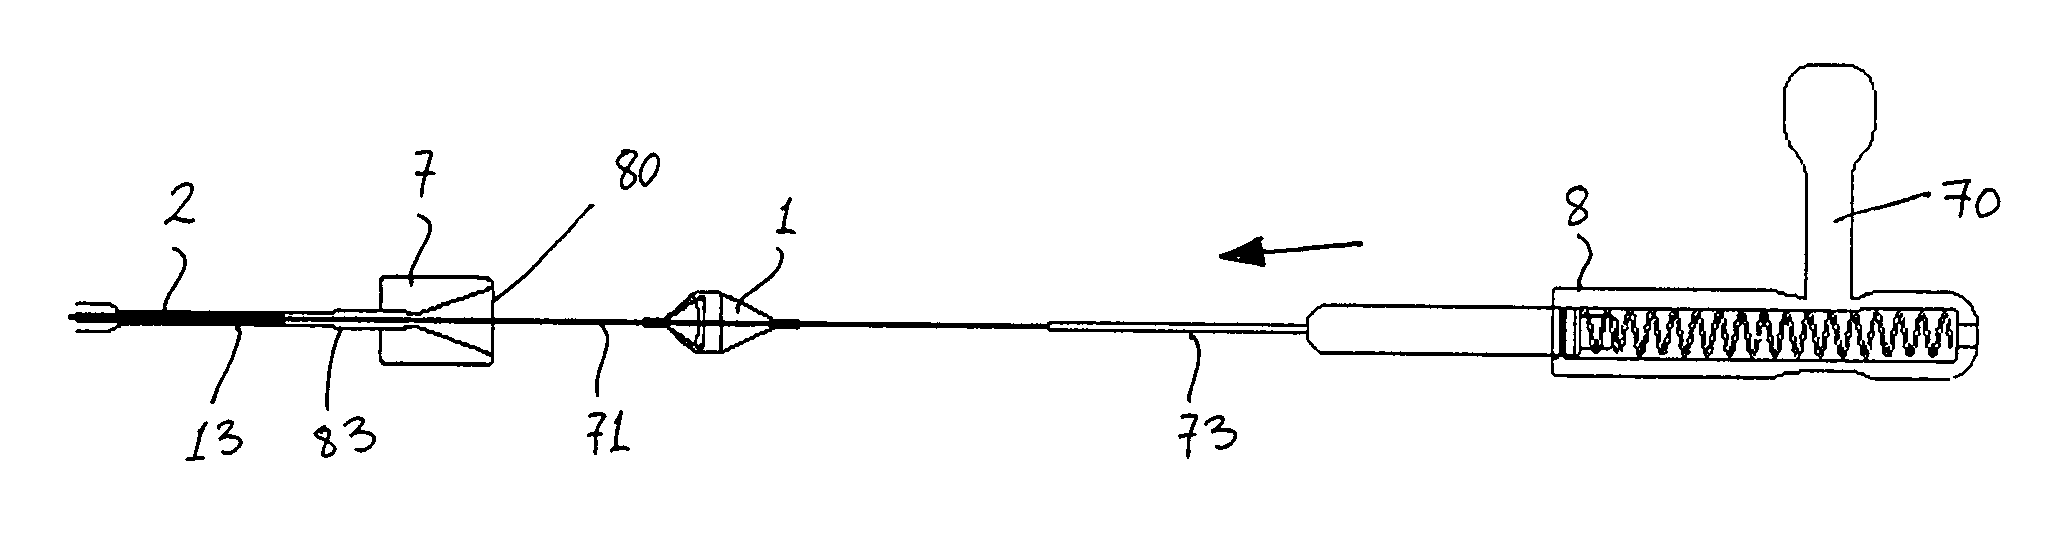 Device for loading an embolic protection filter into a catheter